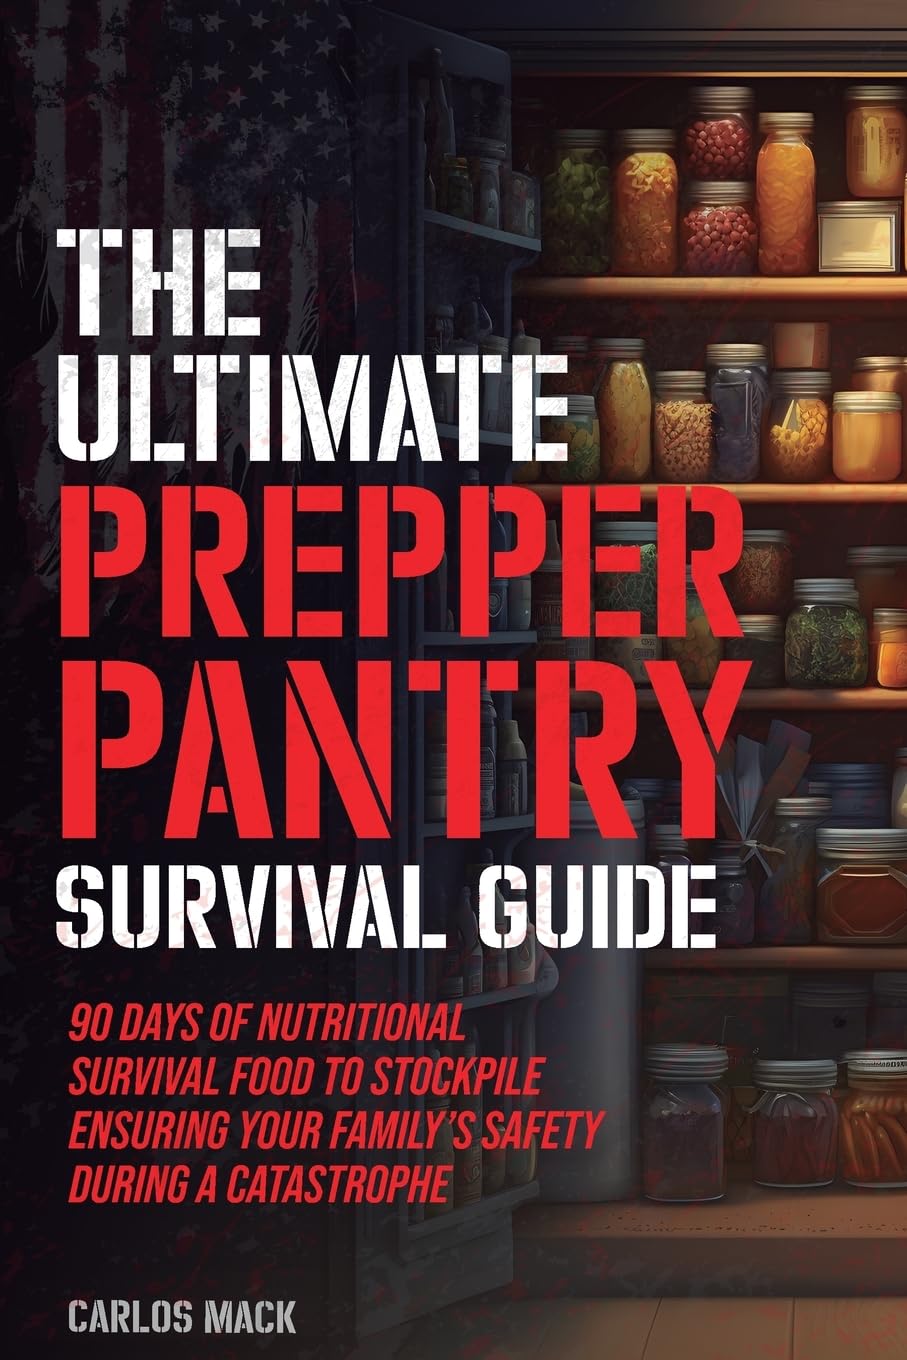 The Ultimate Prepper Pantry Survival Guide: 90 Days of Nutritional Survival Food to Stockpile Ensuring Your Family’s Safety During a Catastrophe